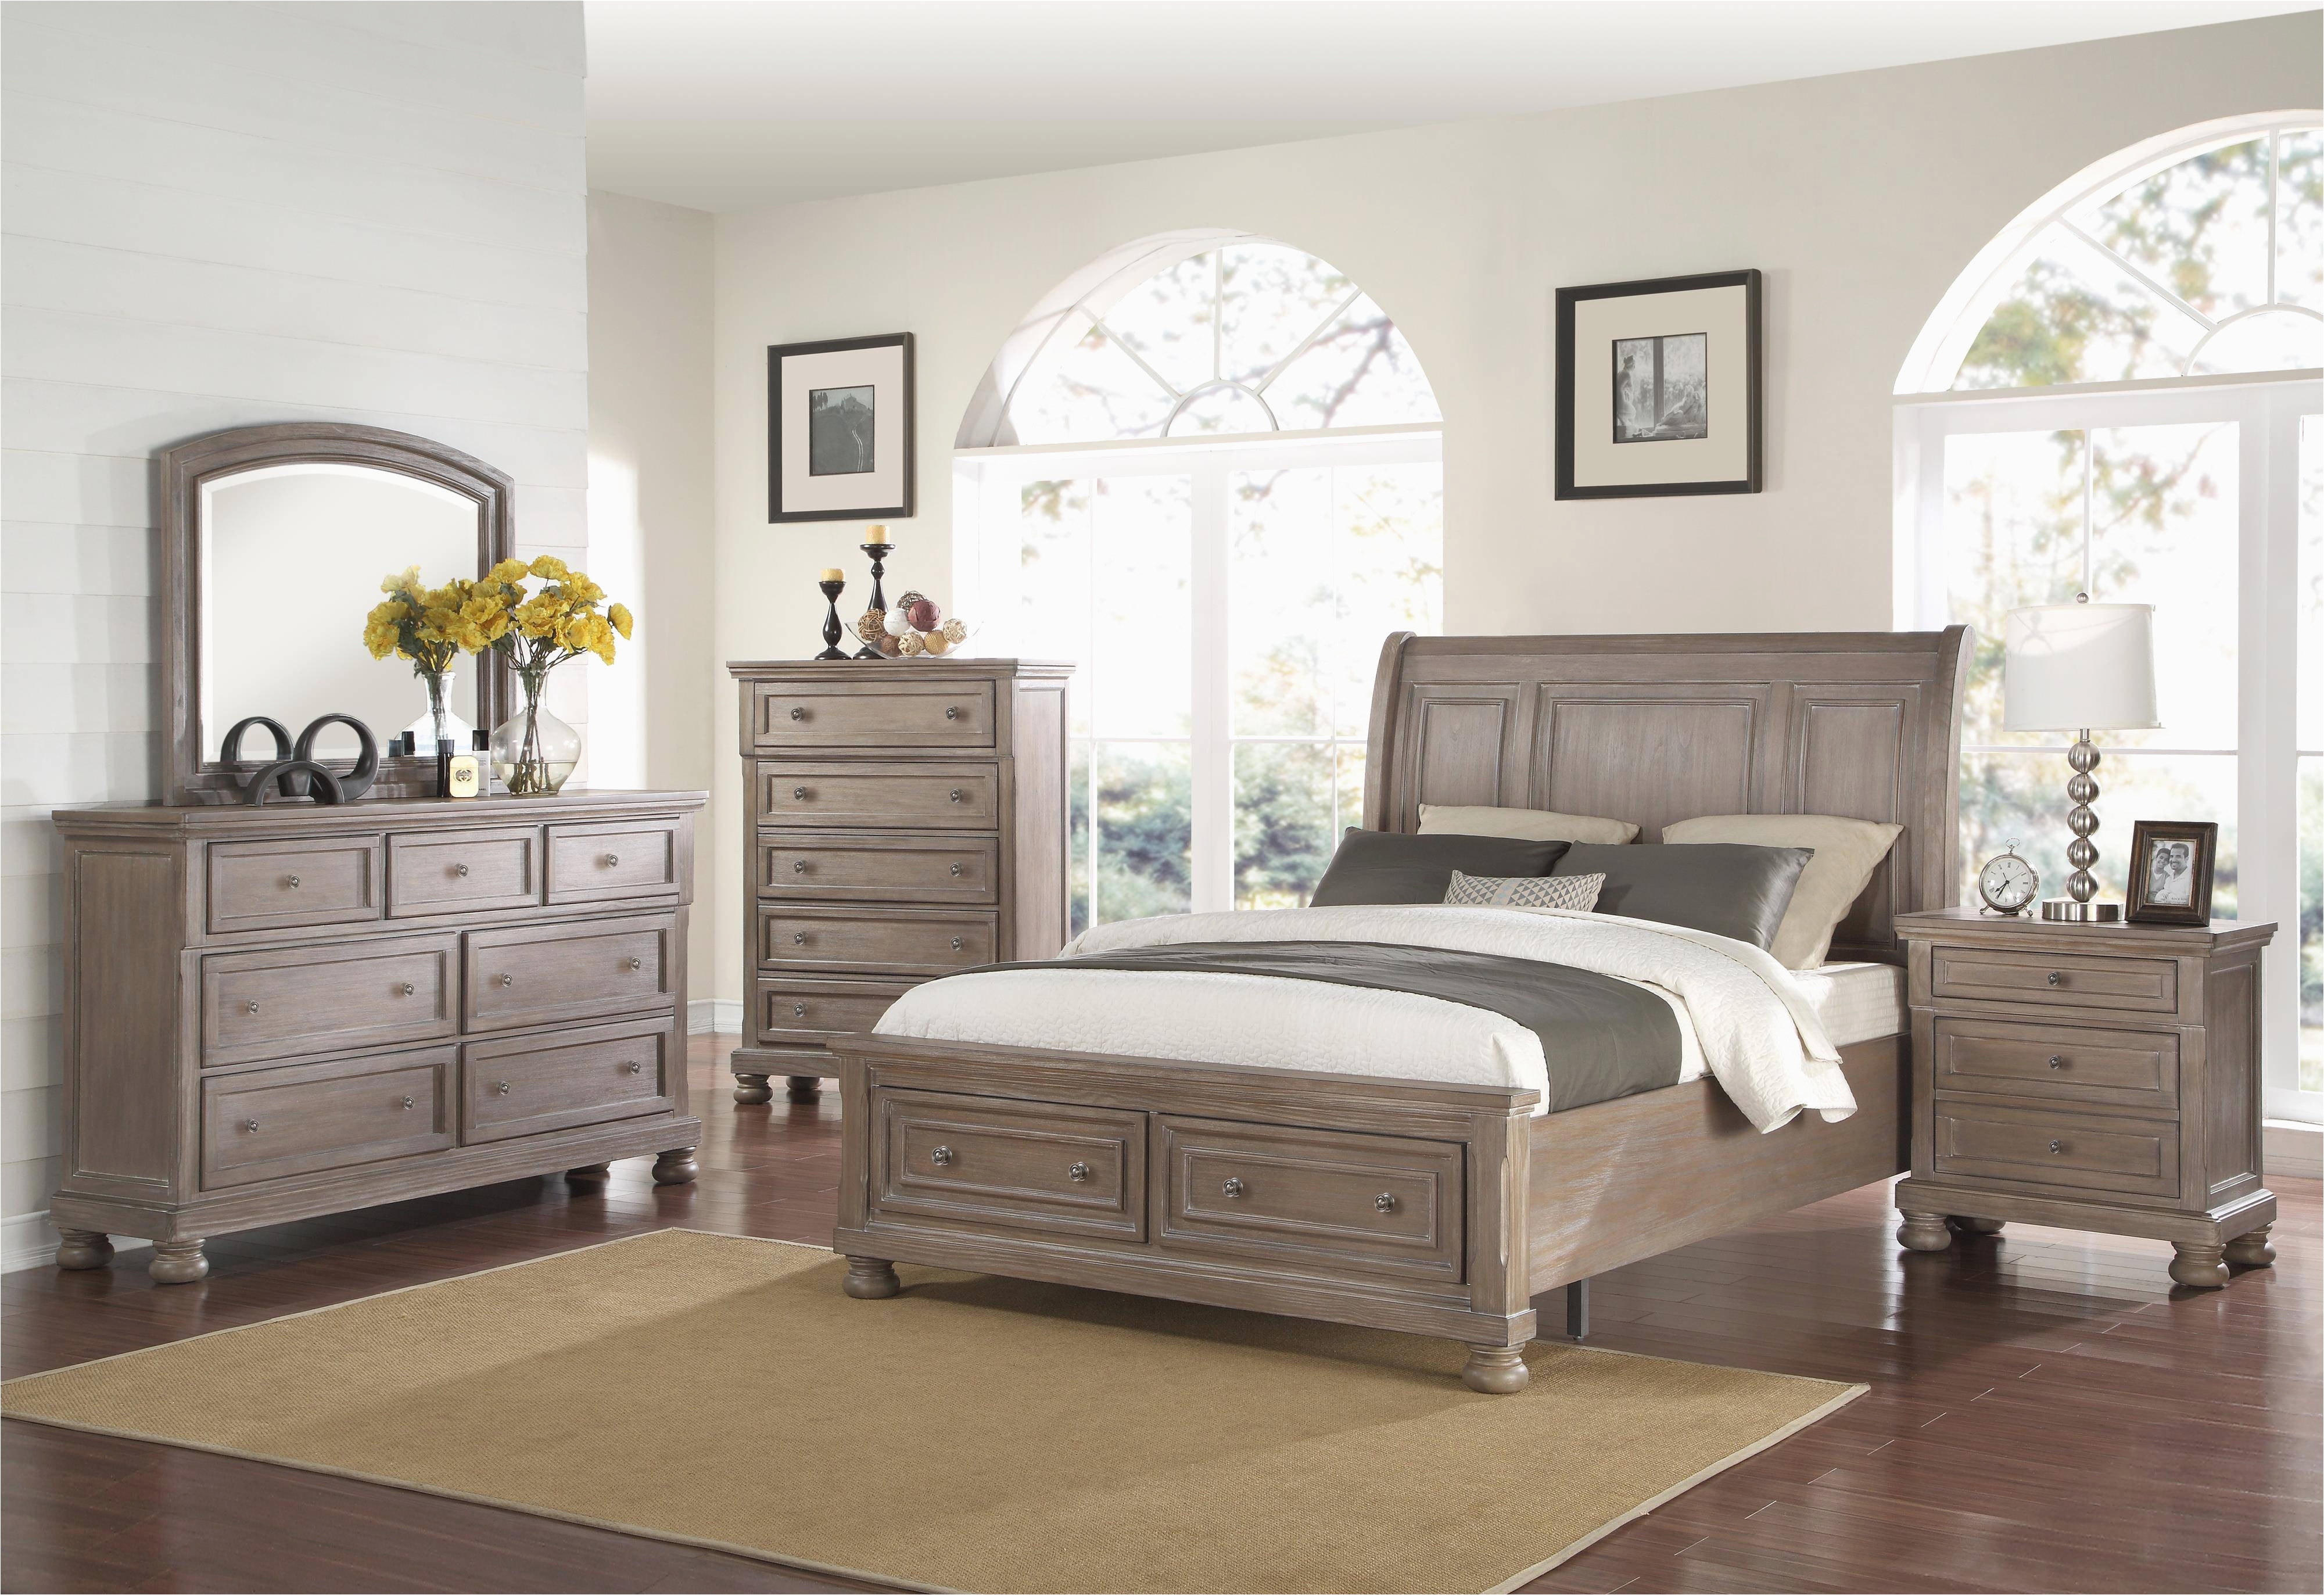 full size of bedroom ideas raymour and flanigan bedroom sets awesome king bedroom set raymour